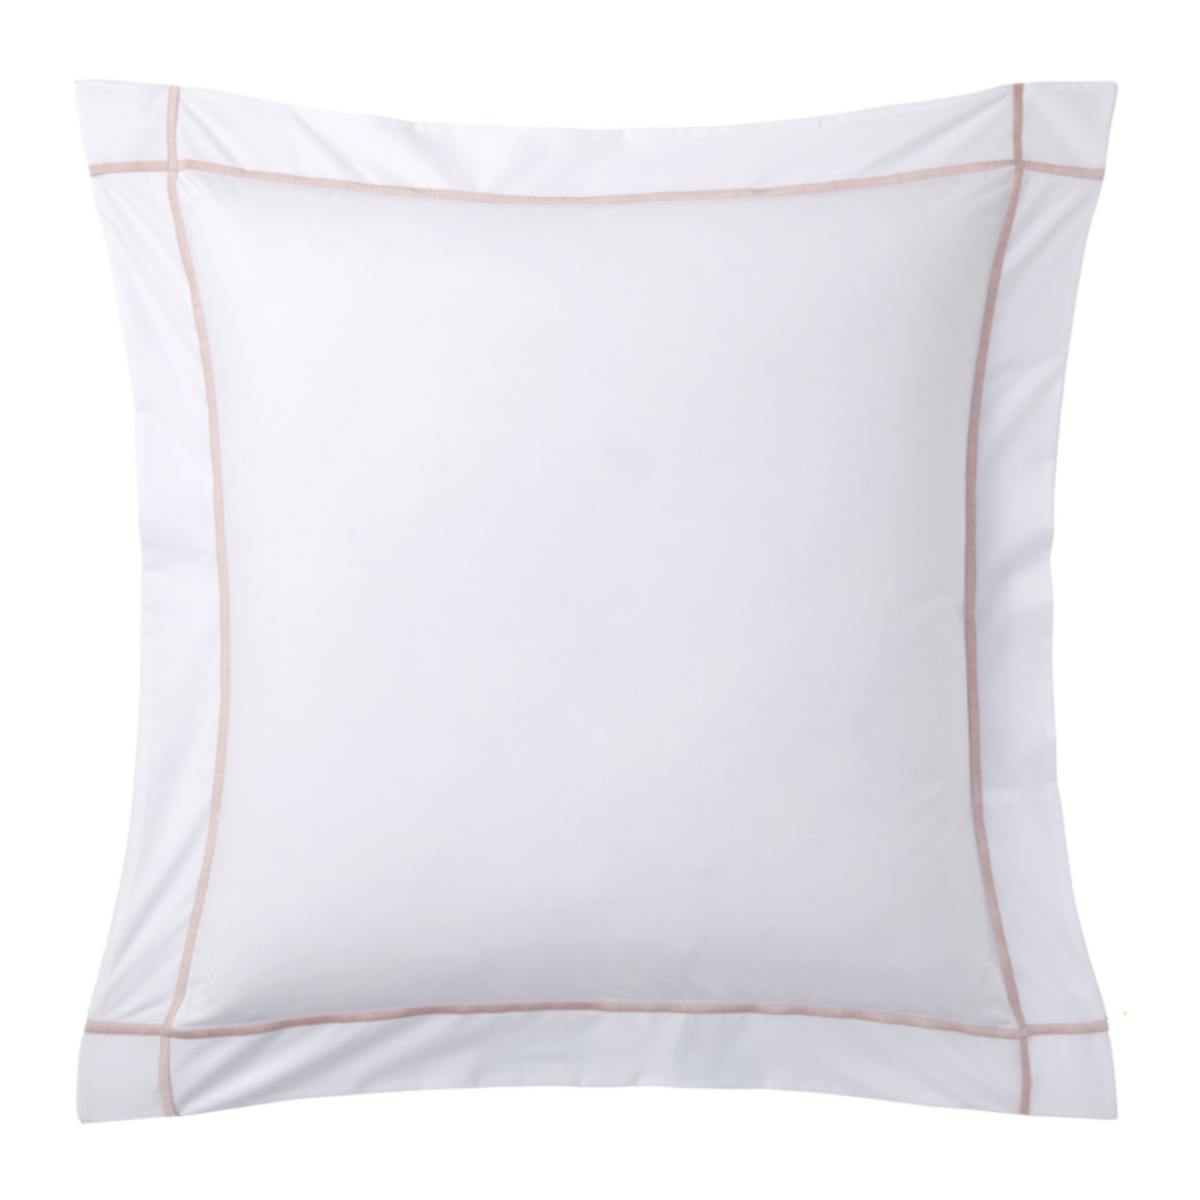 Euro Sham of Yves Delorme Athena Bedding in Poudre Color